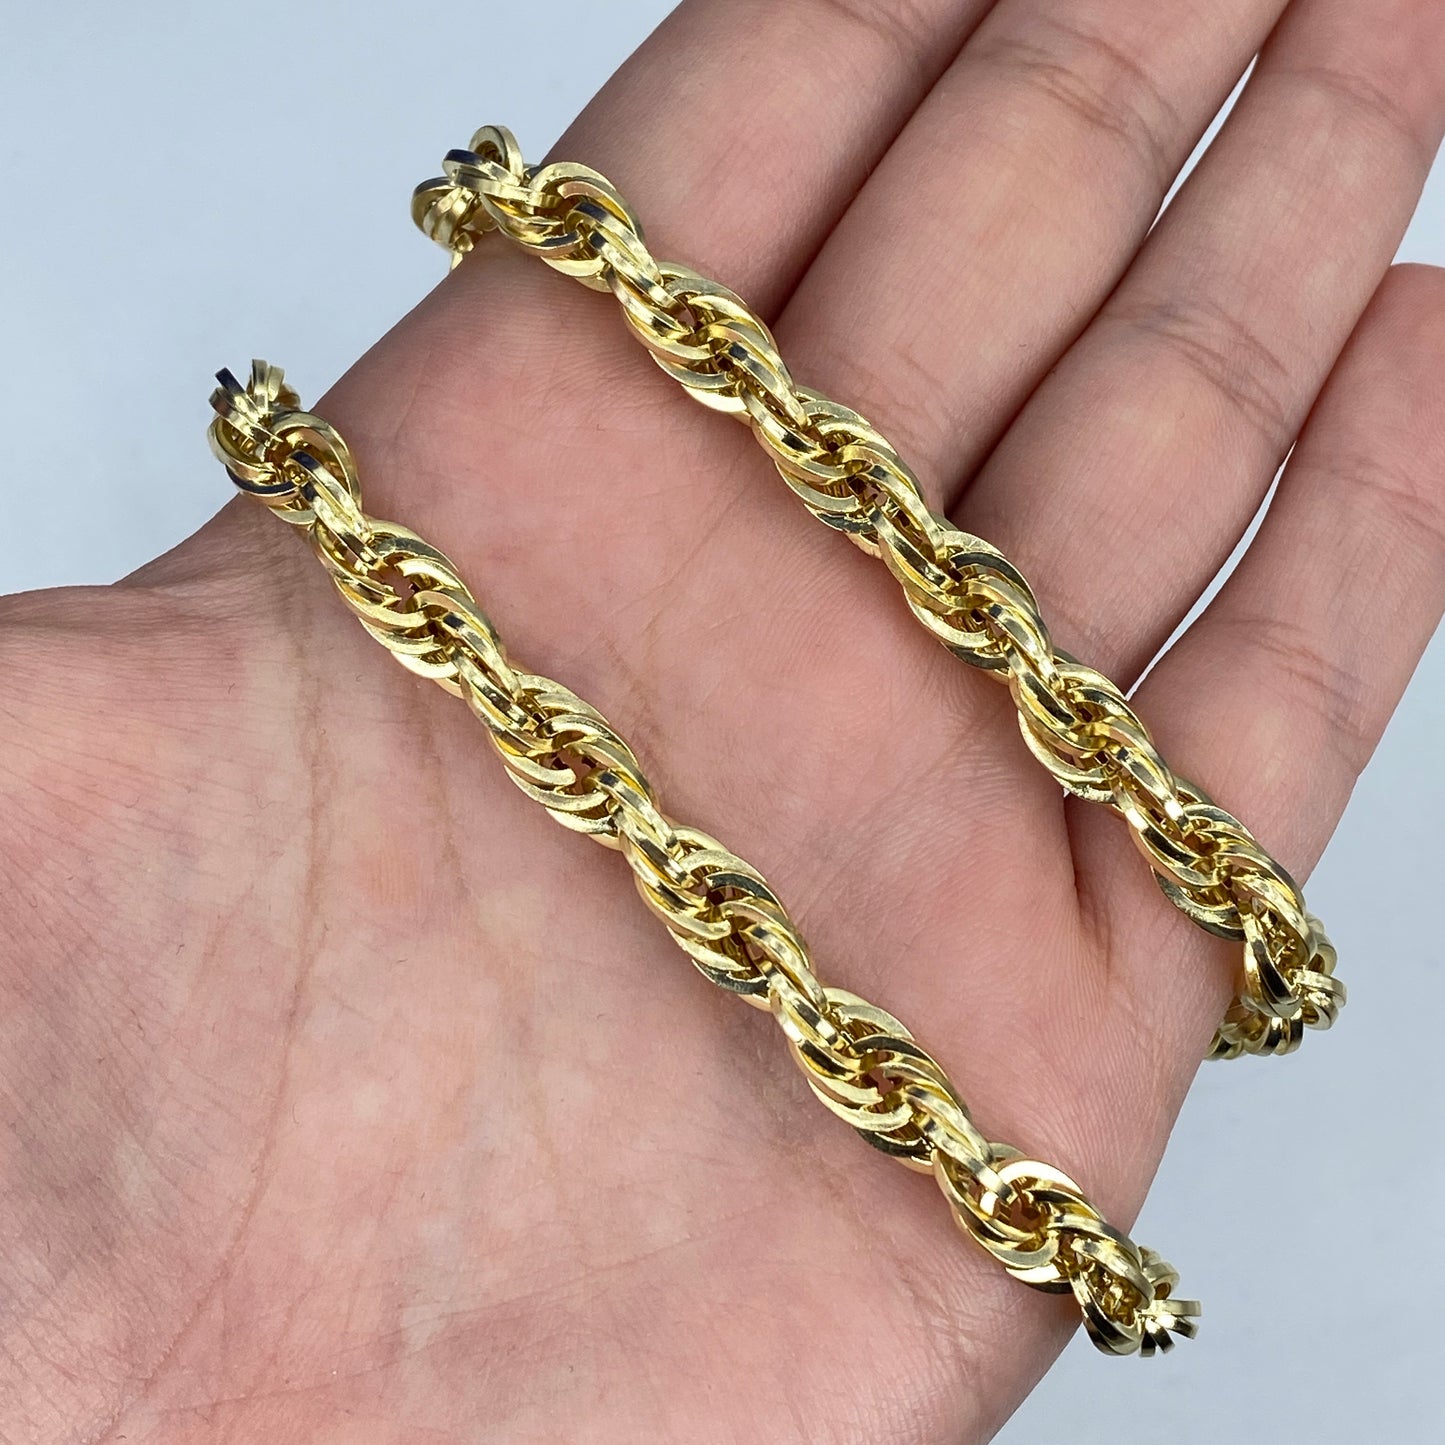 10K 7MM Rope Chain 21"